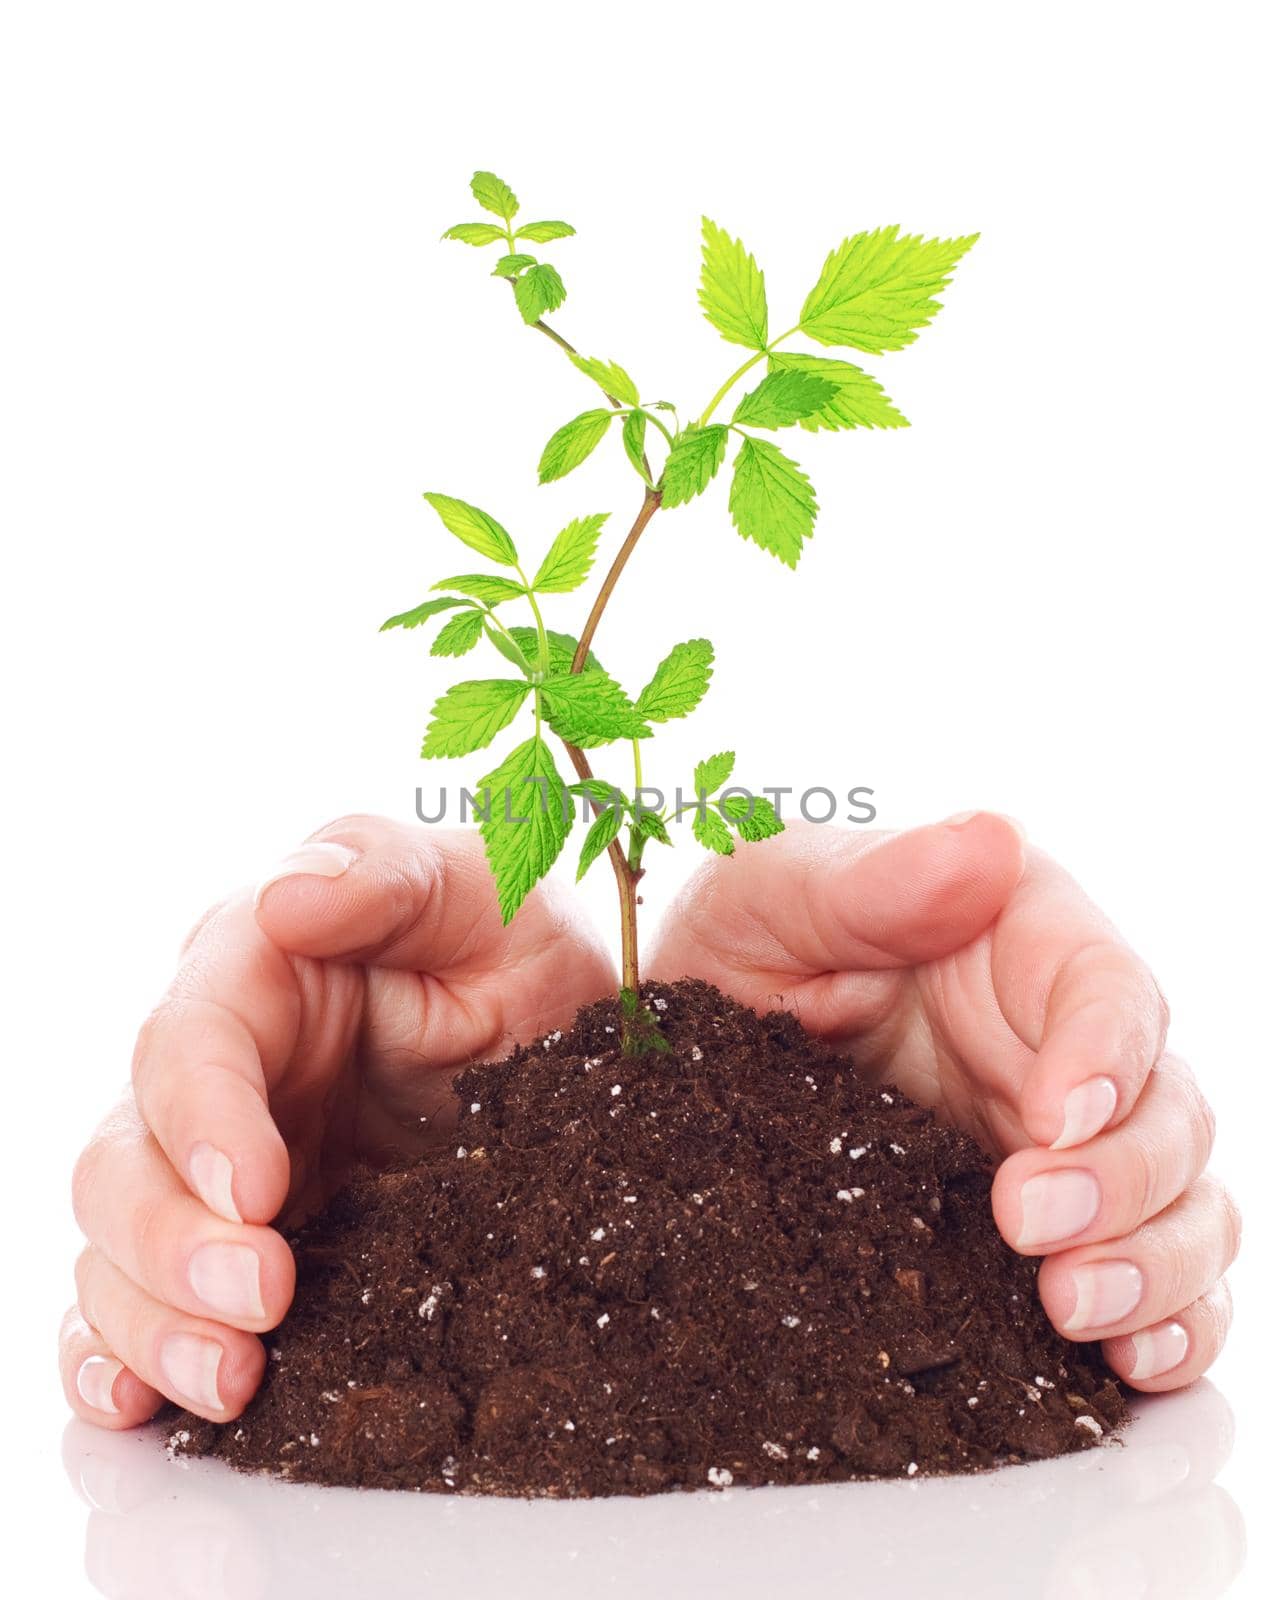 Hands and plant isolated on white background.